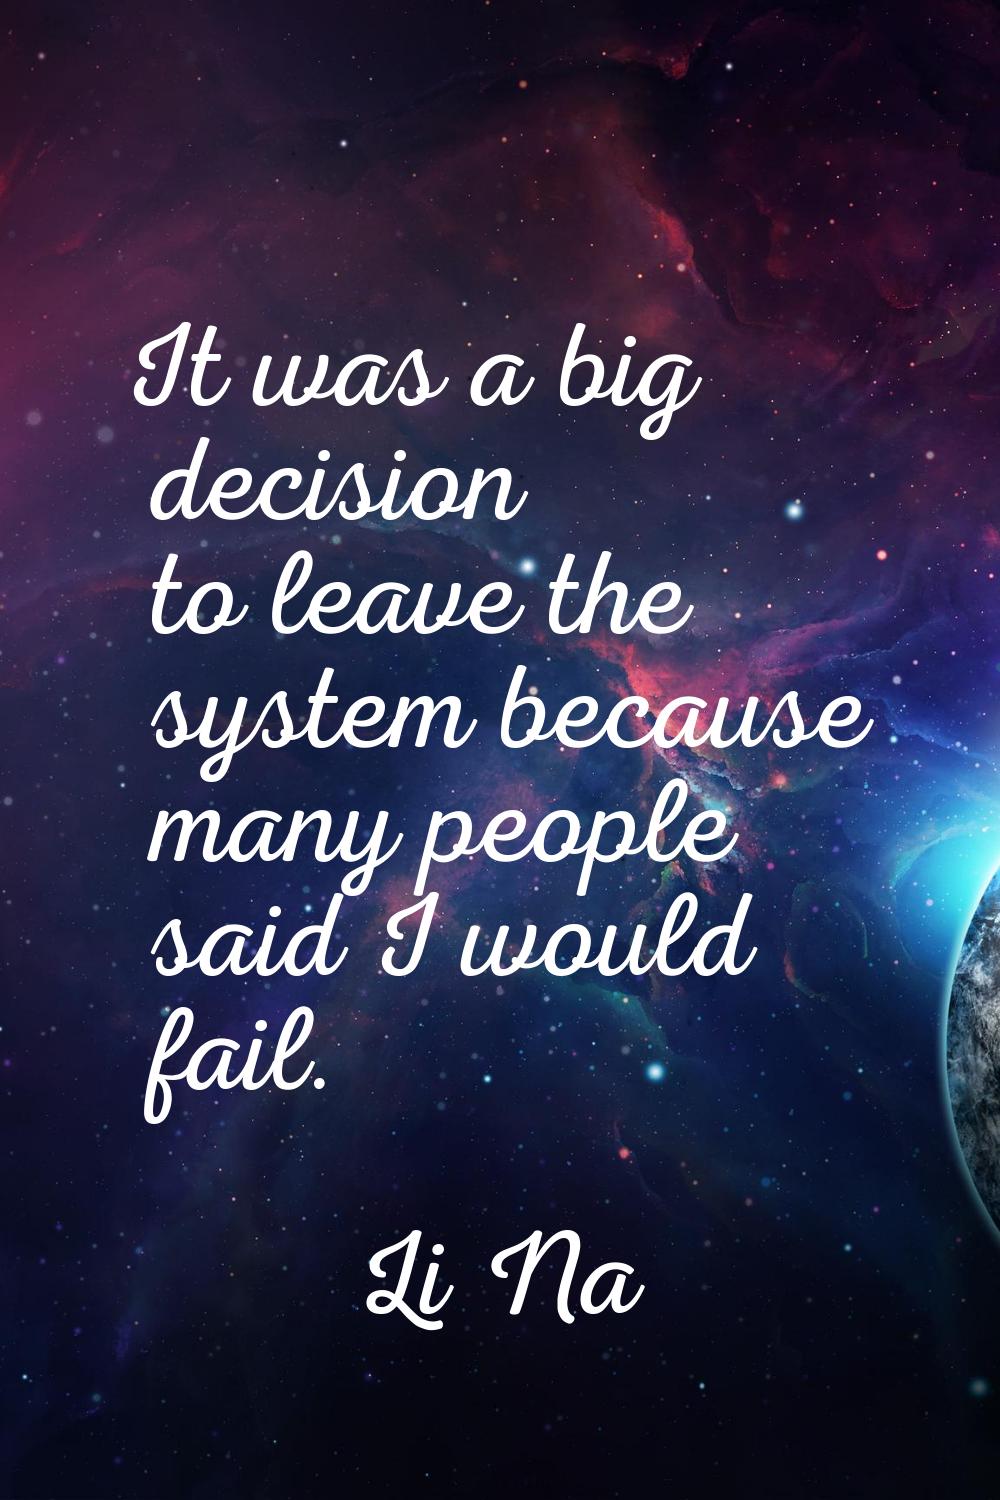 It was a big decision to leave the system because many people said I would fail.